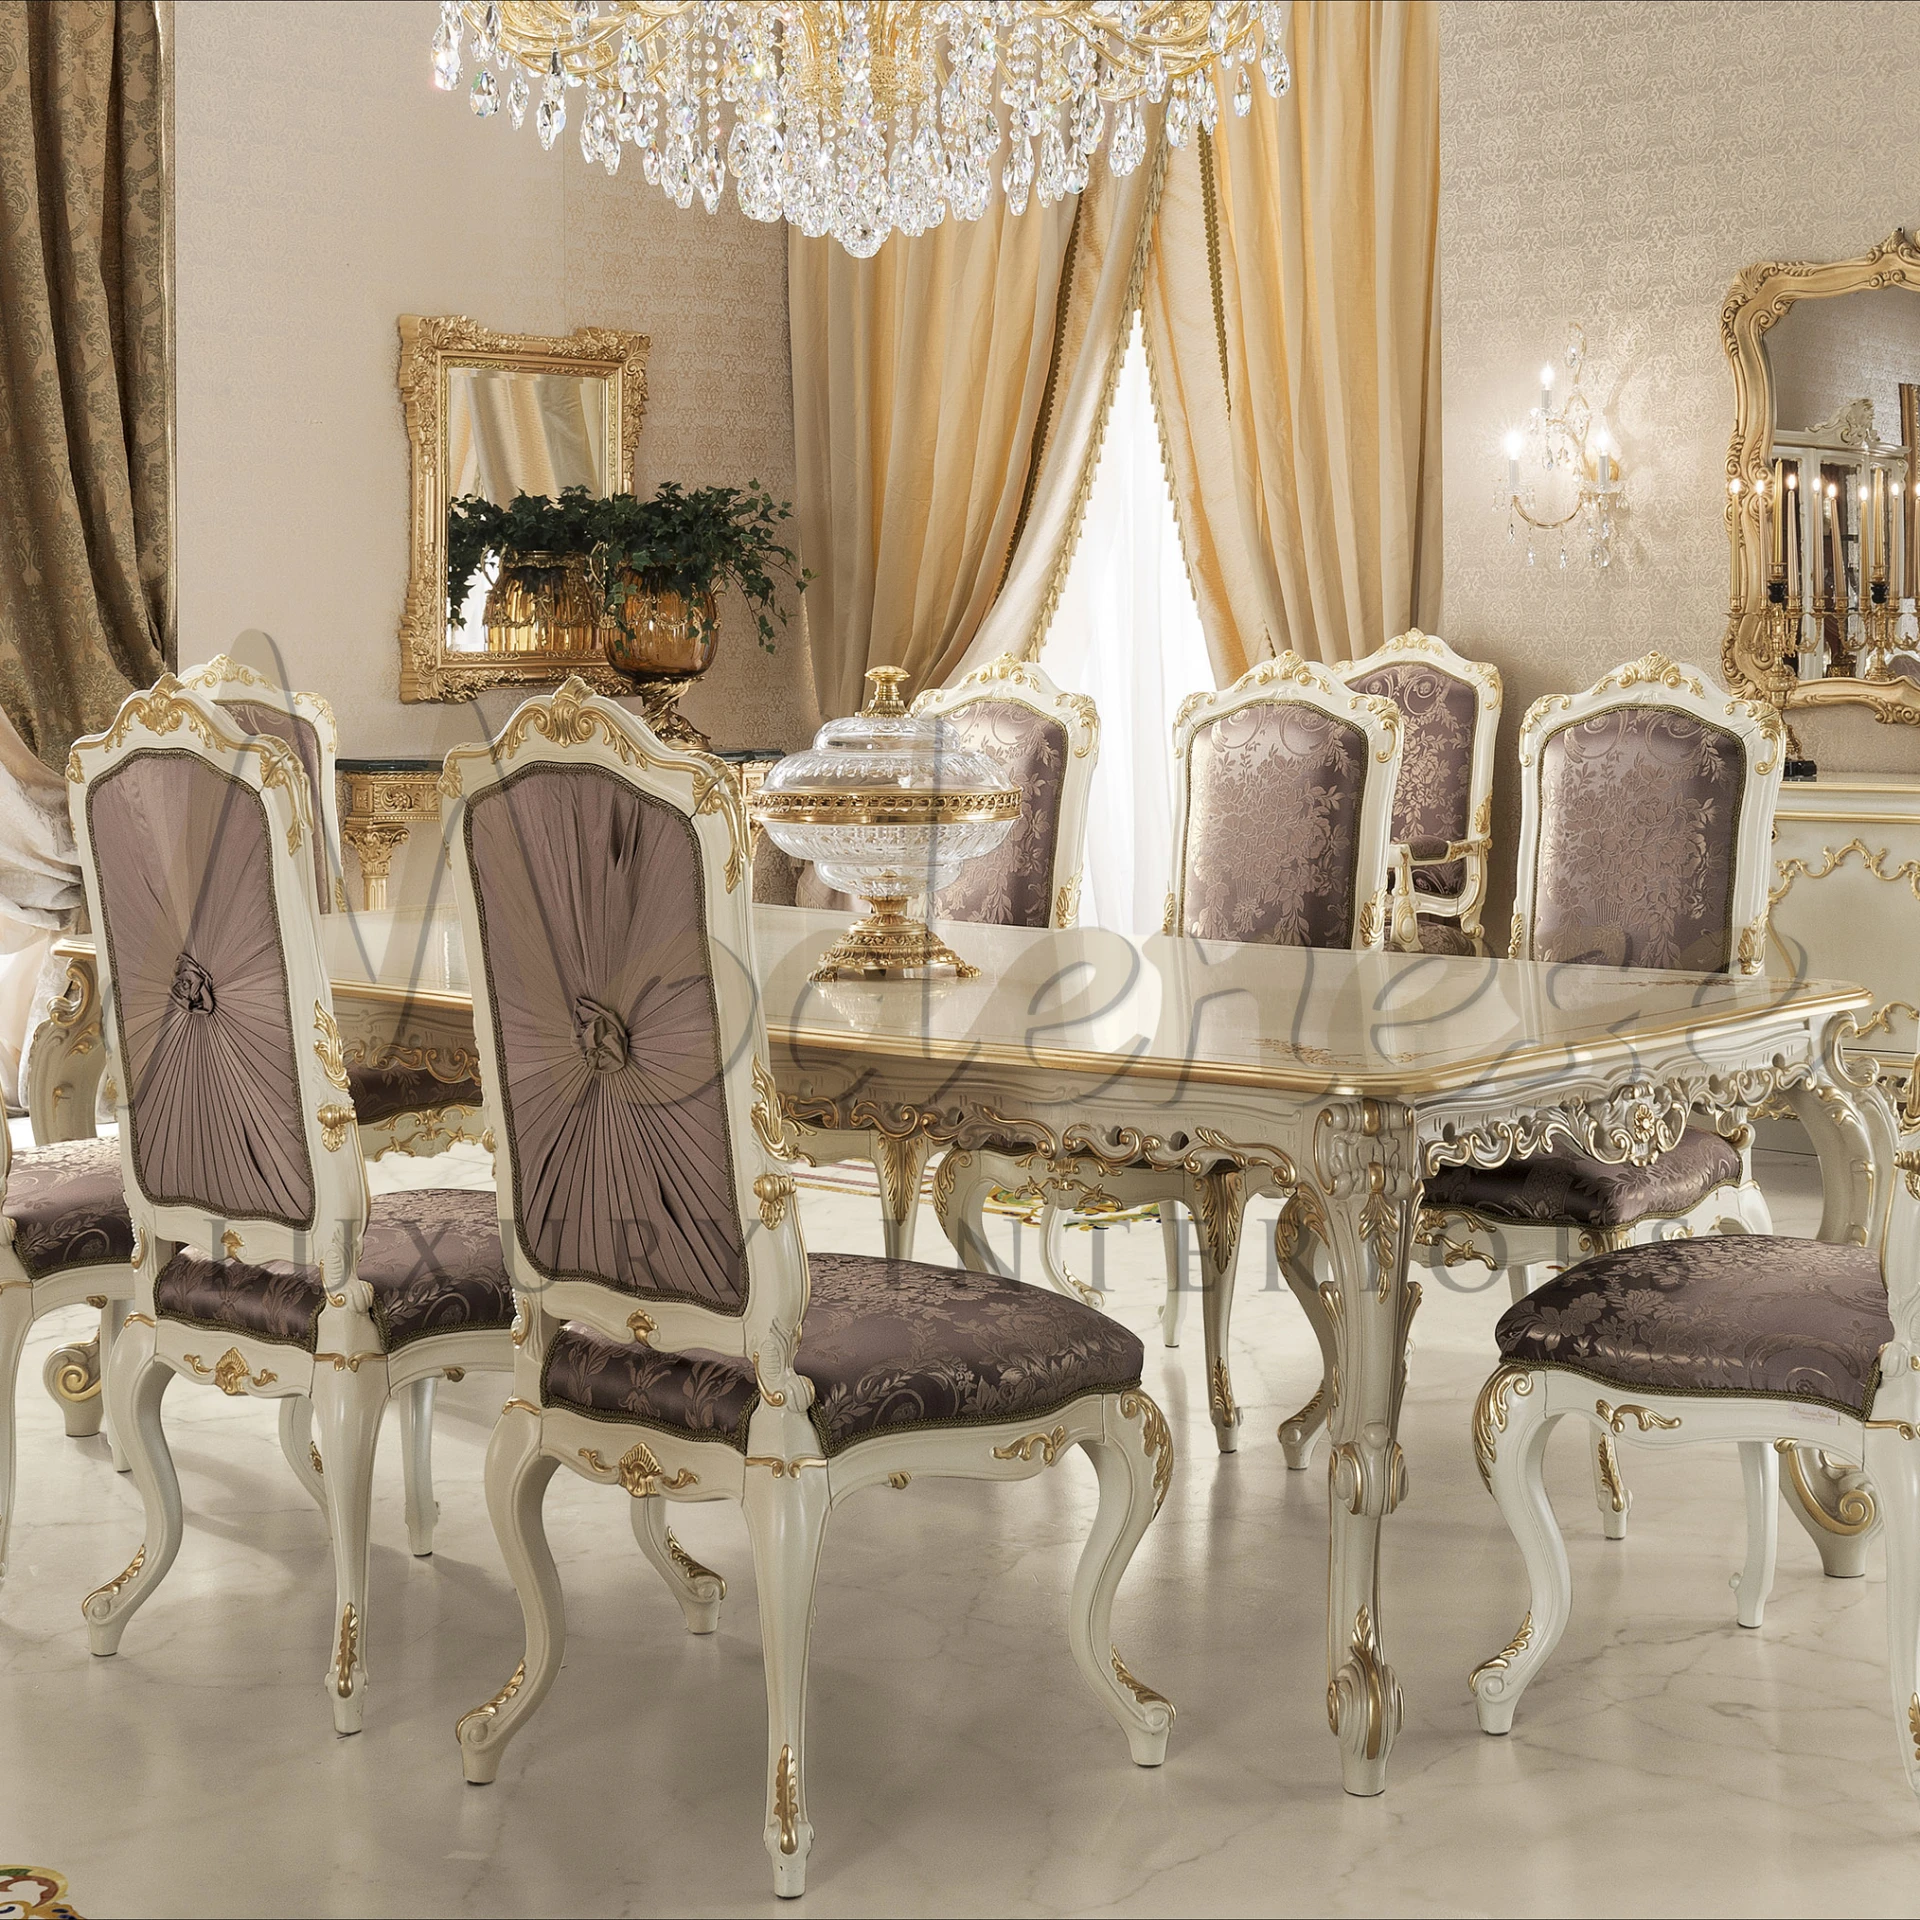 Transform your dining space with Modenese Furniture's regal table and chair. Baroque legs and gold leaf applique enhance the aura of refinement.